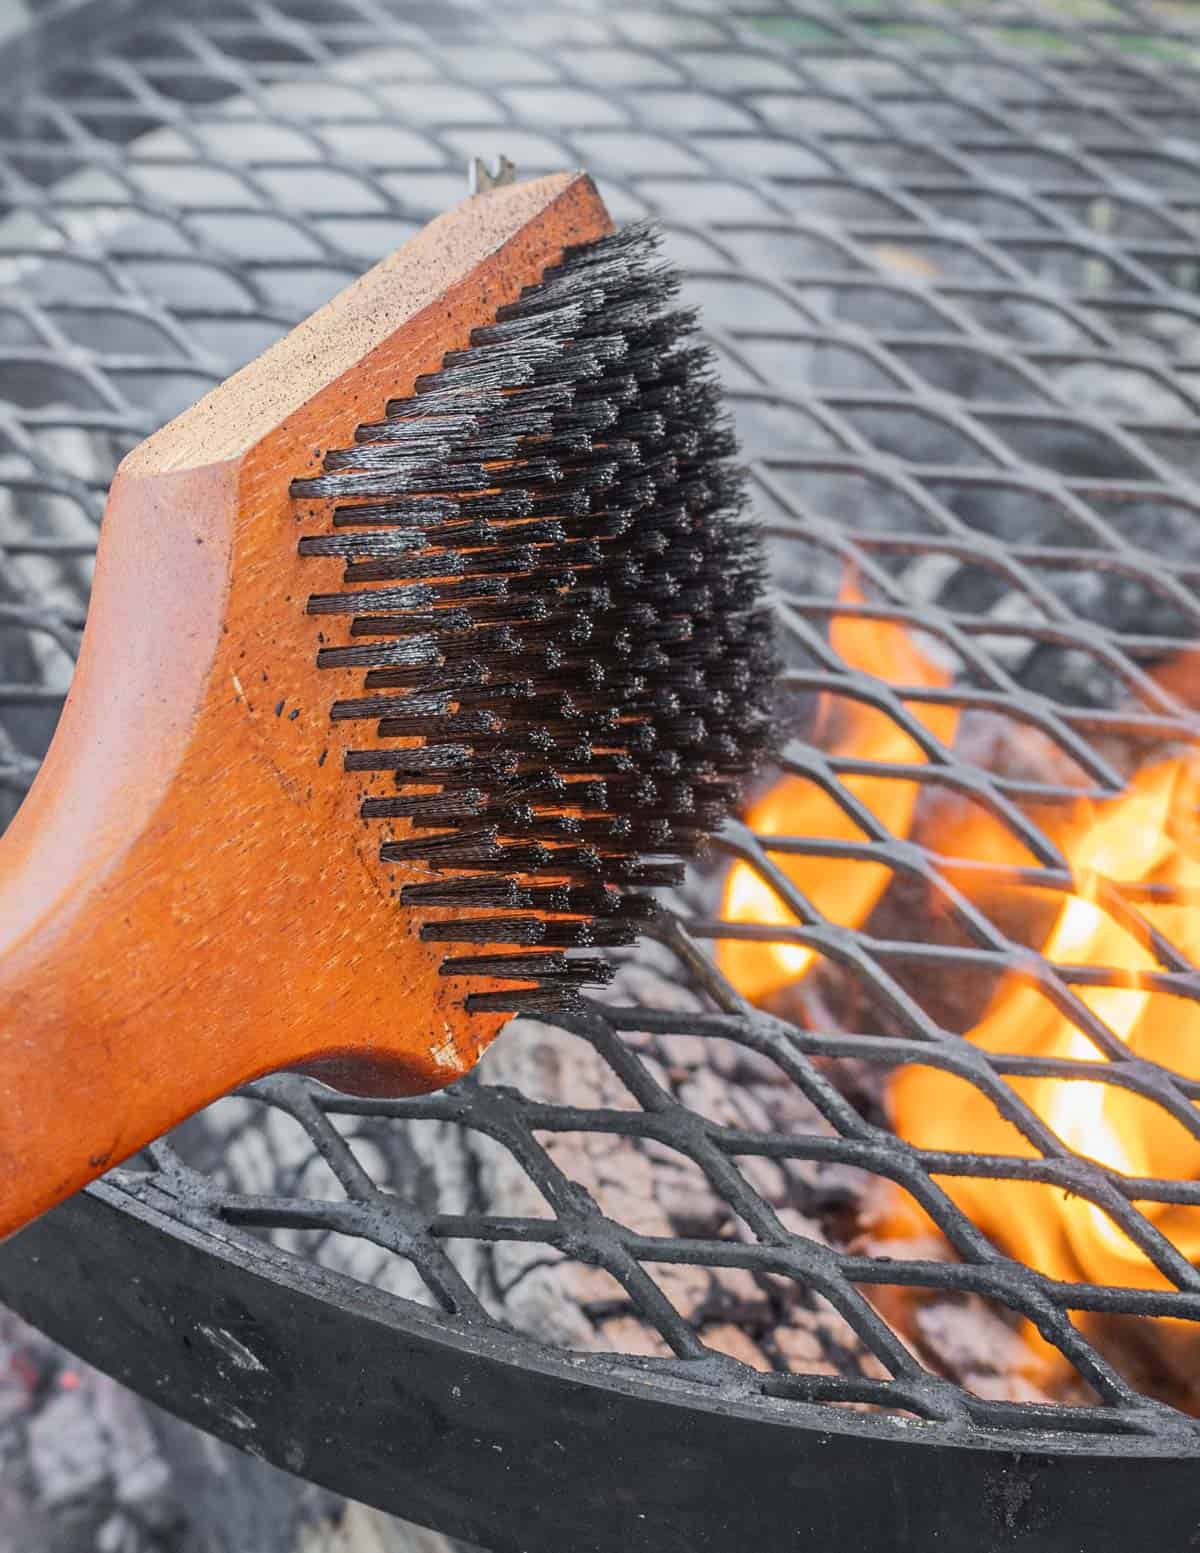 Cleaning a kudu grill wood fire grill using a grill brush.